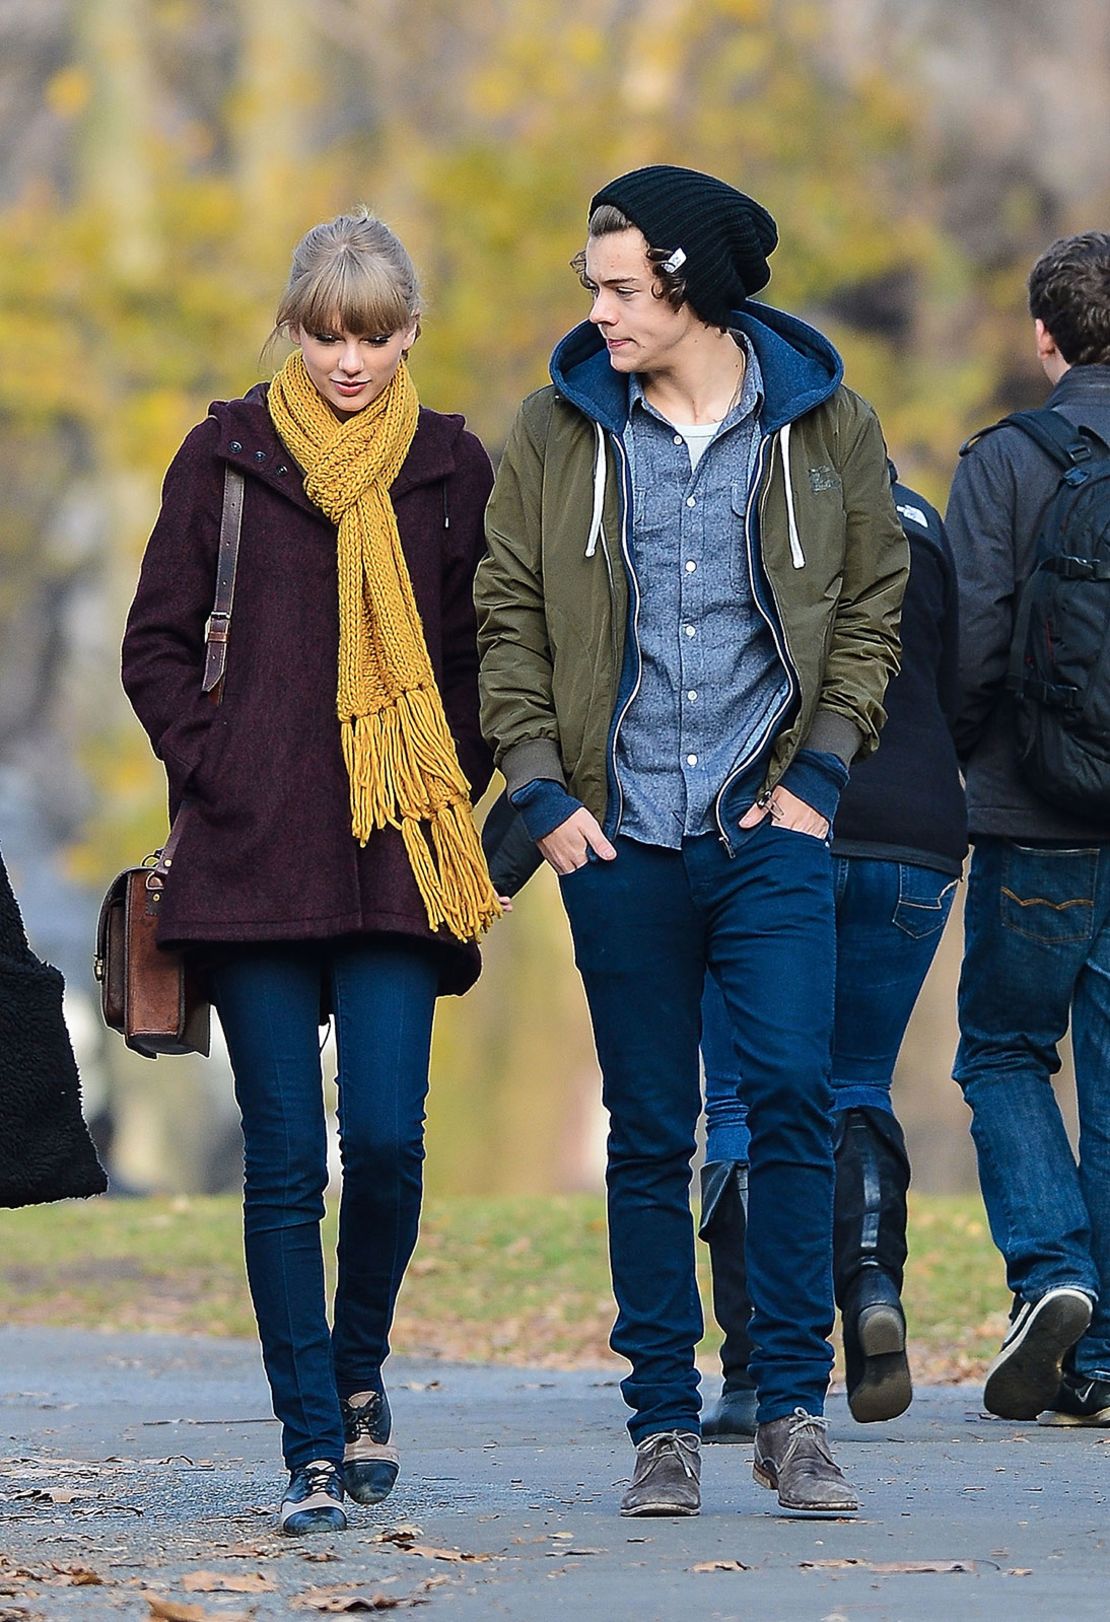 Taylor Swift and Harry Styles in Central Park in 2012.